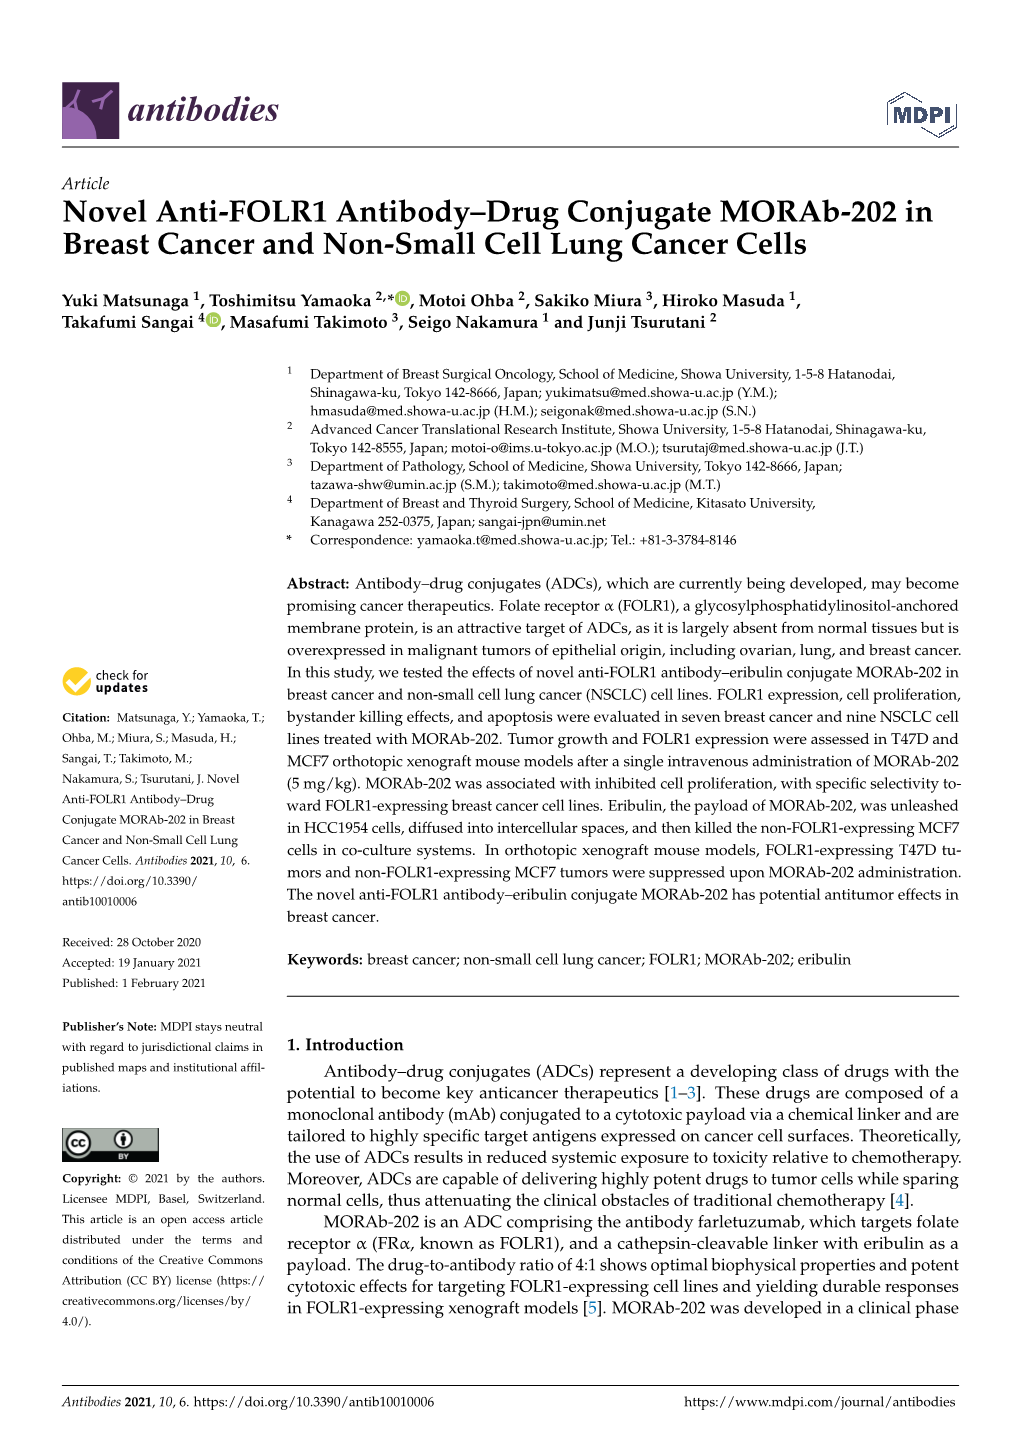 Novel Anti-FOLR1 Antibody–Drug Conjugate Morab-202 in Breast Cancer and Non-Small Cell Lung Cancer Cells